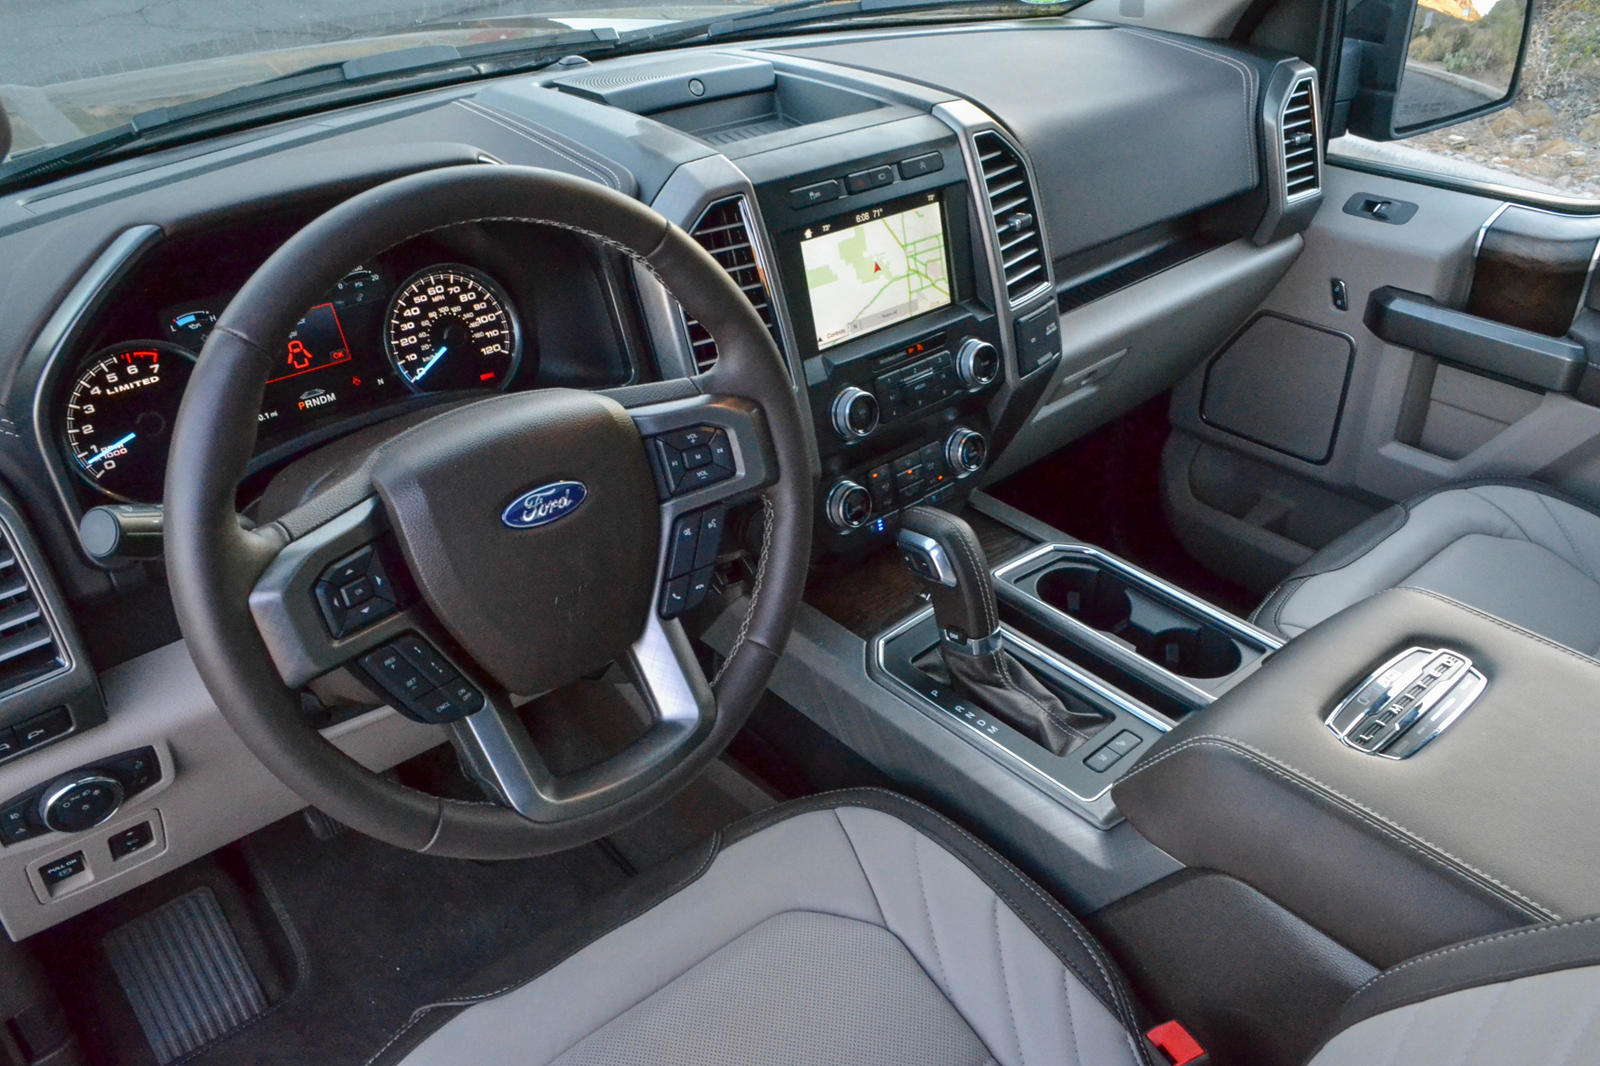 View Photos, Open Photo Gallery - 2019 Ford F150 Lariat Interior  Transparent PNG - 800x400 - Free Download on NicePNG